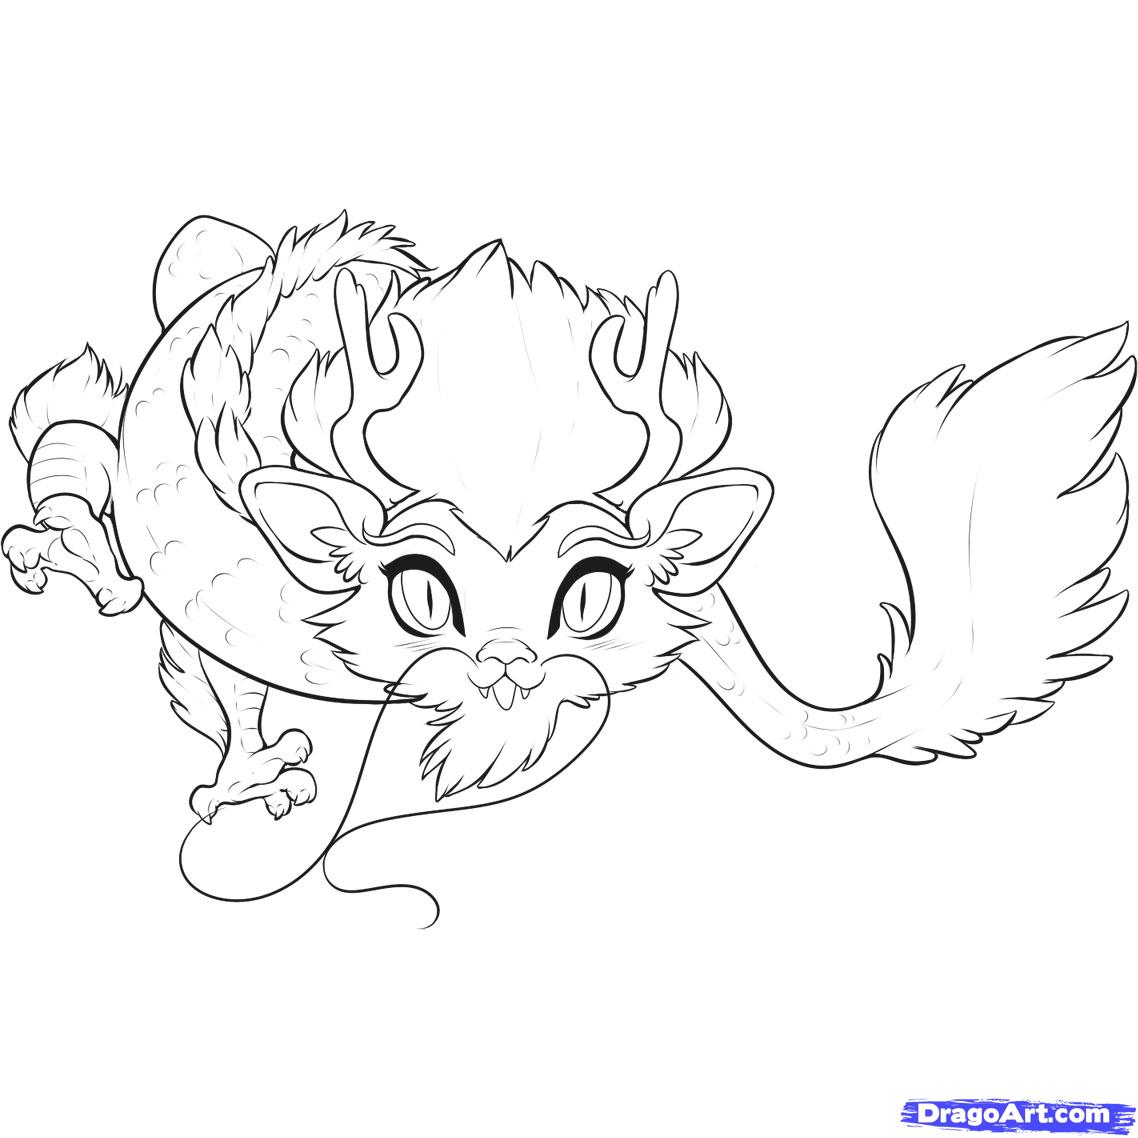 How to Draw a Chibi Chinese Dragon, Step by Step, Chibis, Draw ...